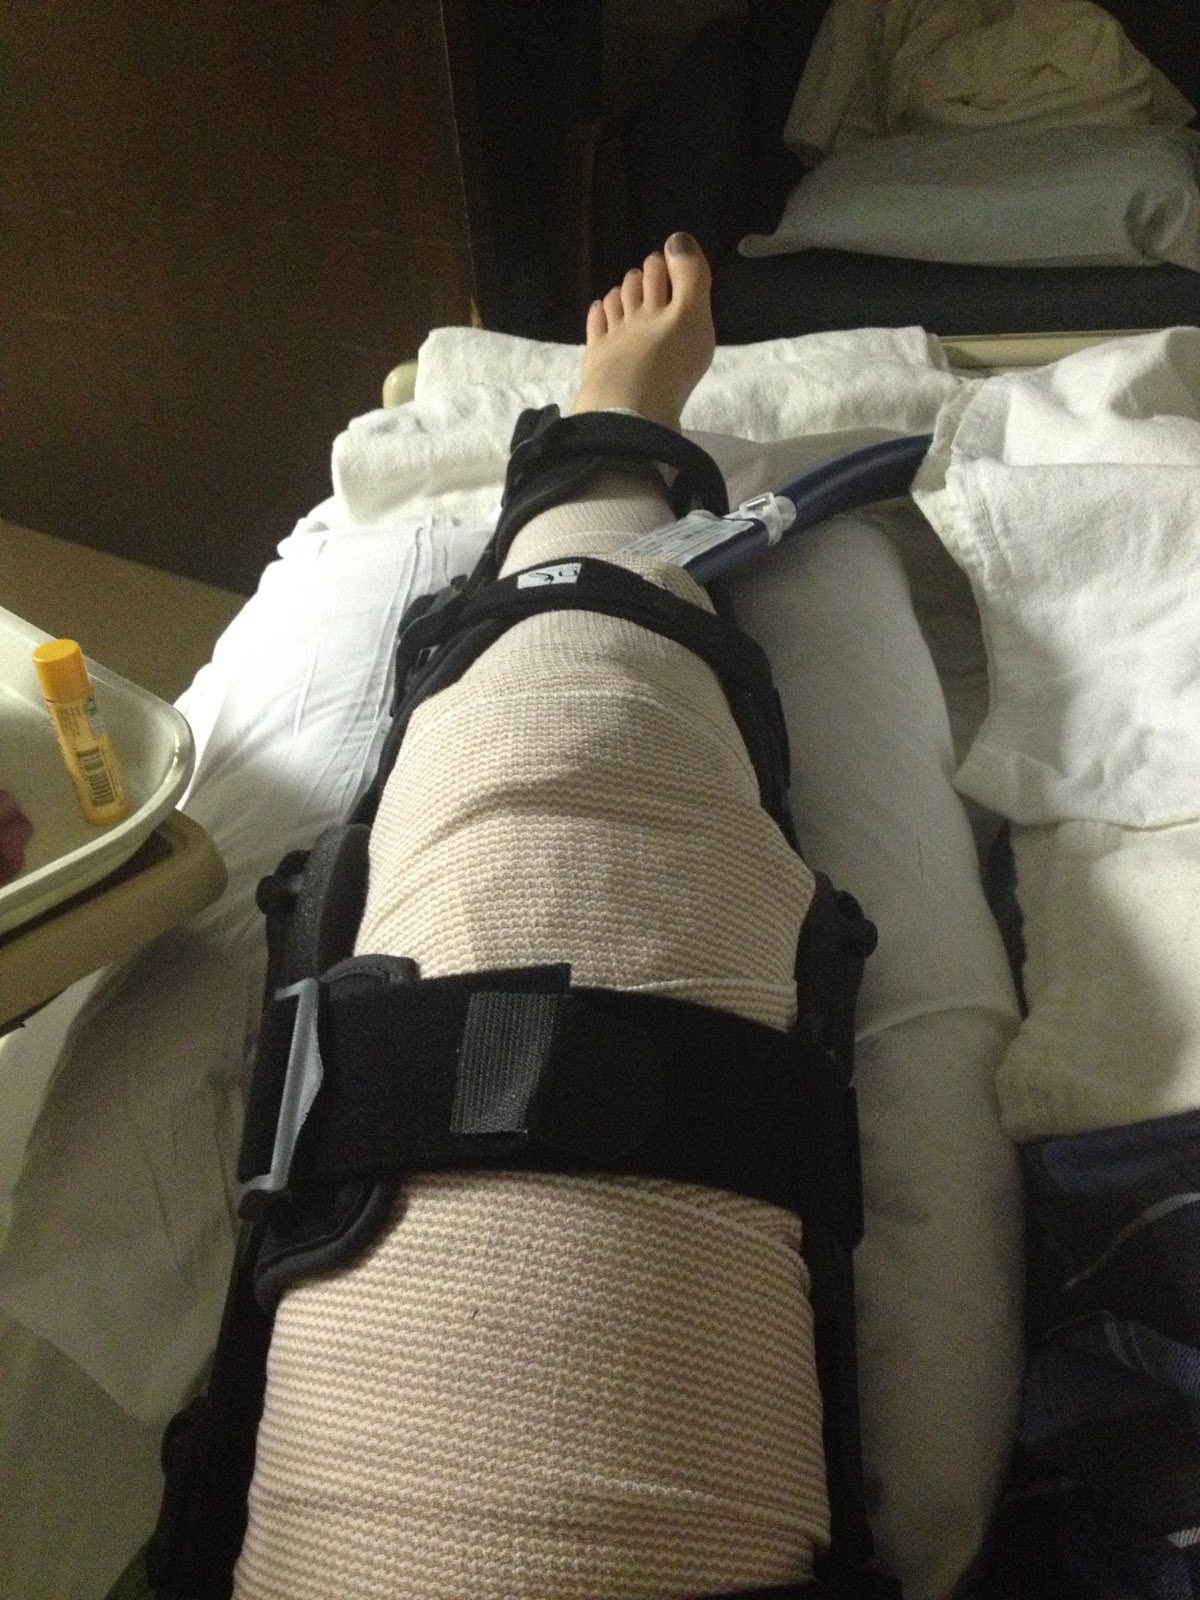 be well (and laugh): Torn Meniscus